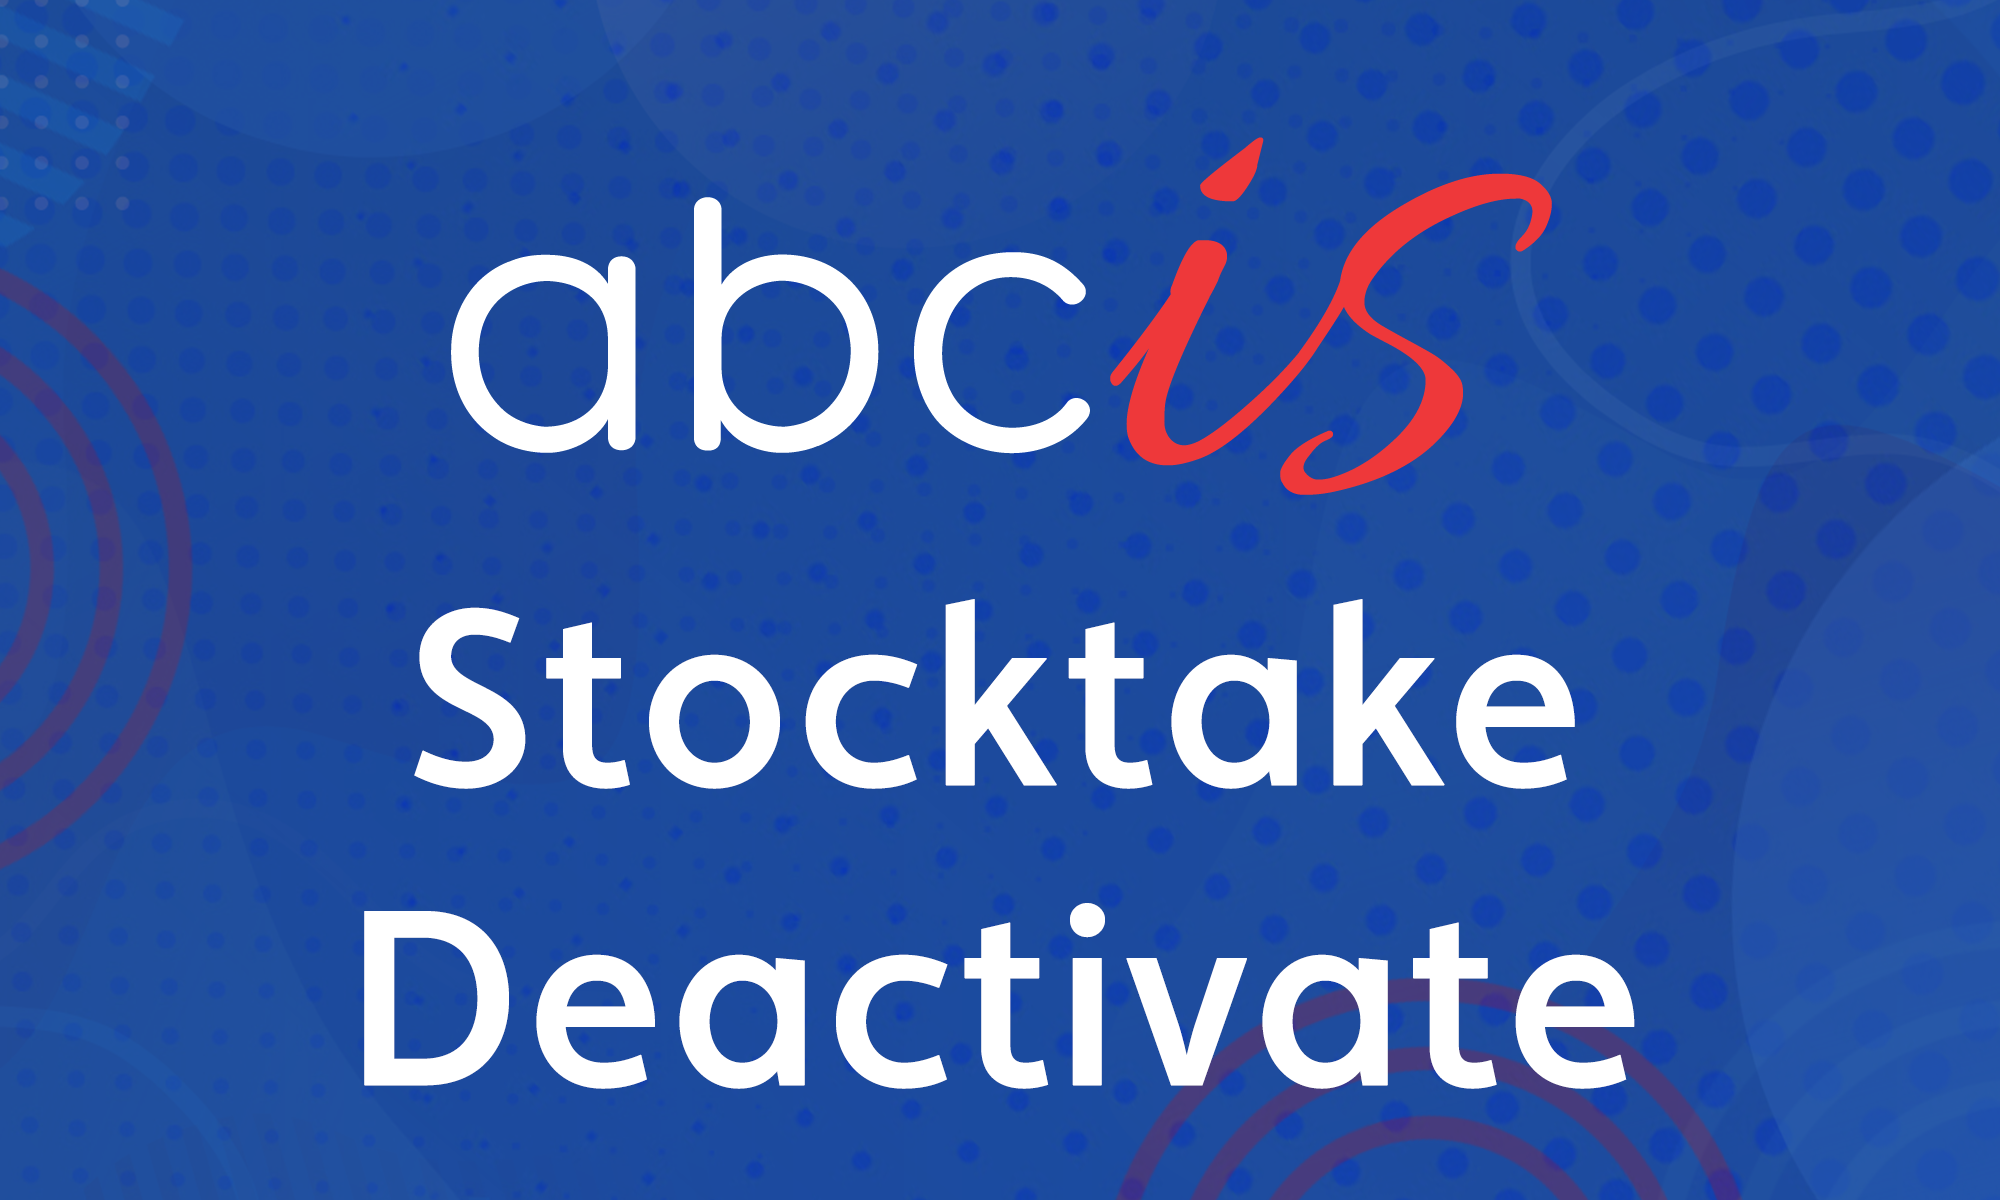 Featured image for “Stocktake Deactivate”